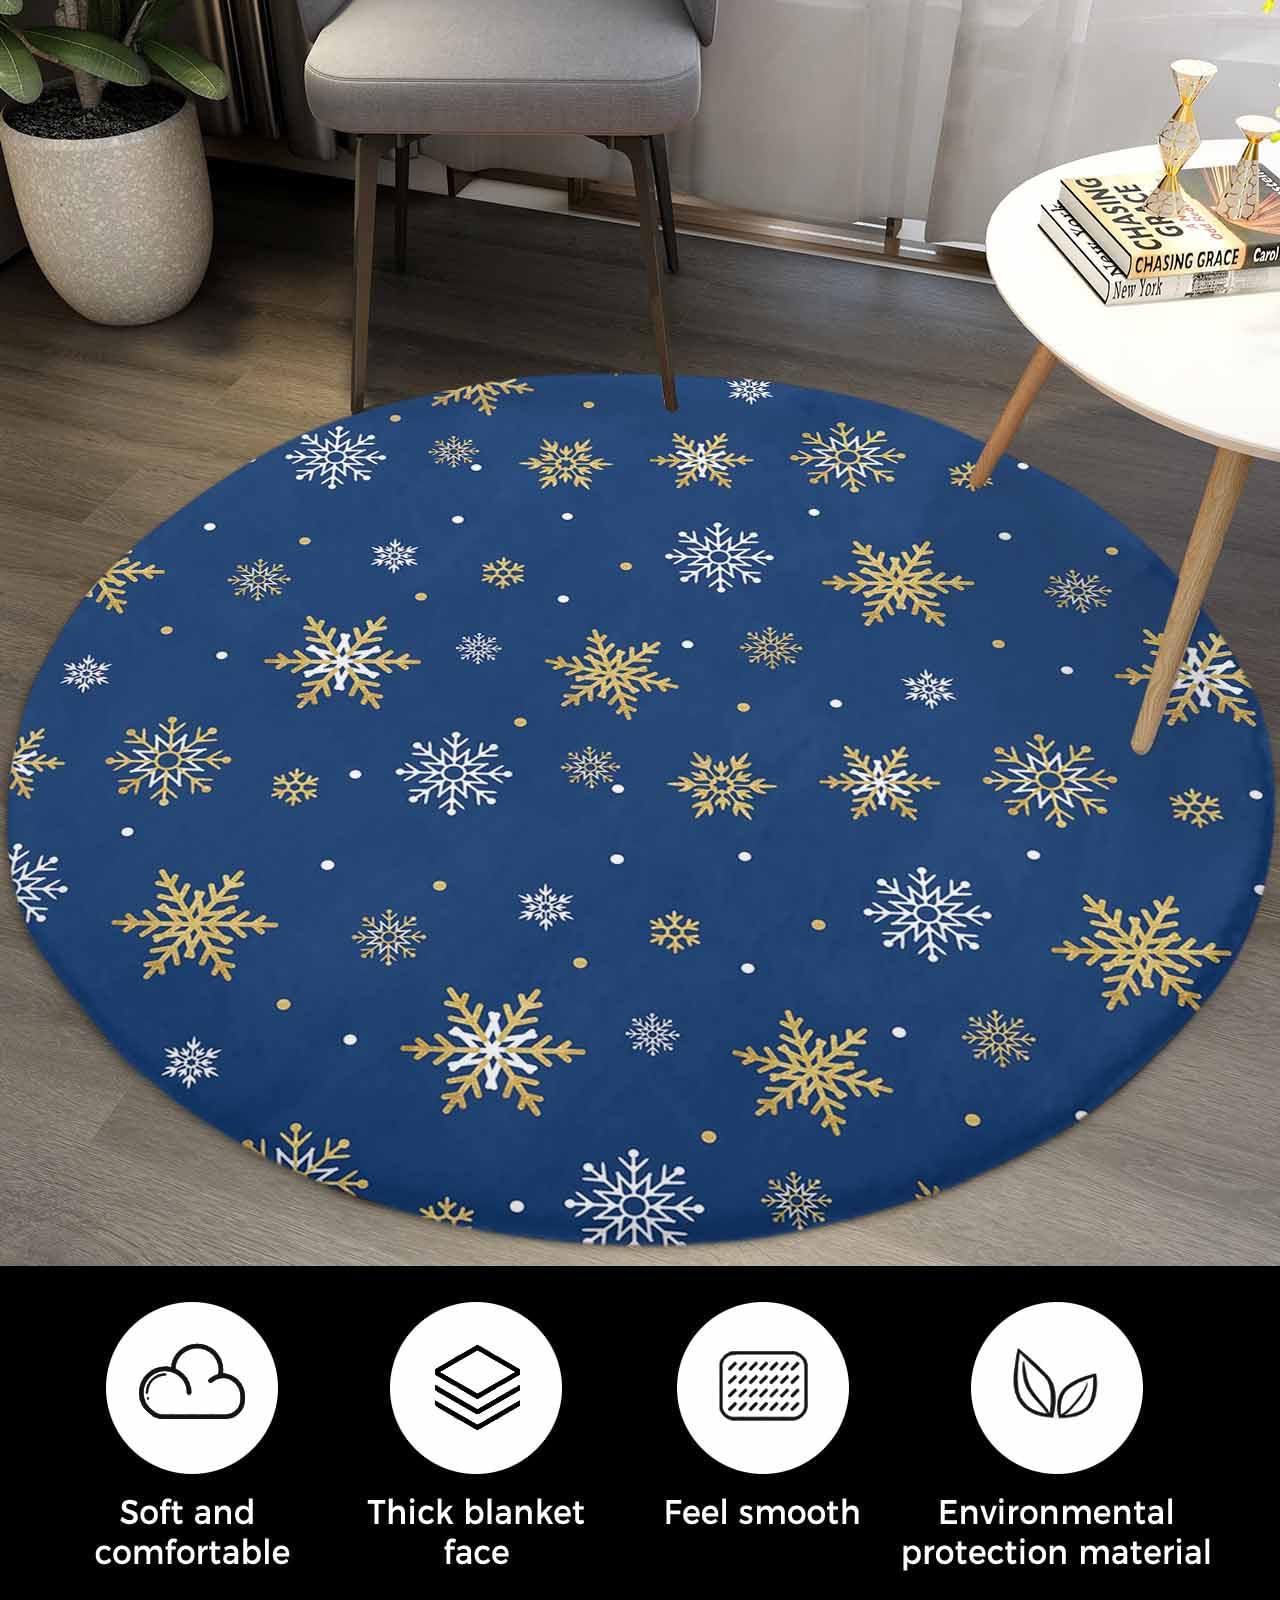 Navy Gold Snowflake Fluffy Round Area Rug Carpets 3.3ft, Plush Shaggy Carpet Soft Circular Rugs, Non-Slip Fuzzy Accent Floor Mat for Living Room Bedroom Nursery Decor Christmas Minimalist White Blue